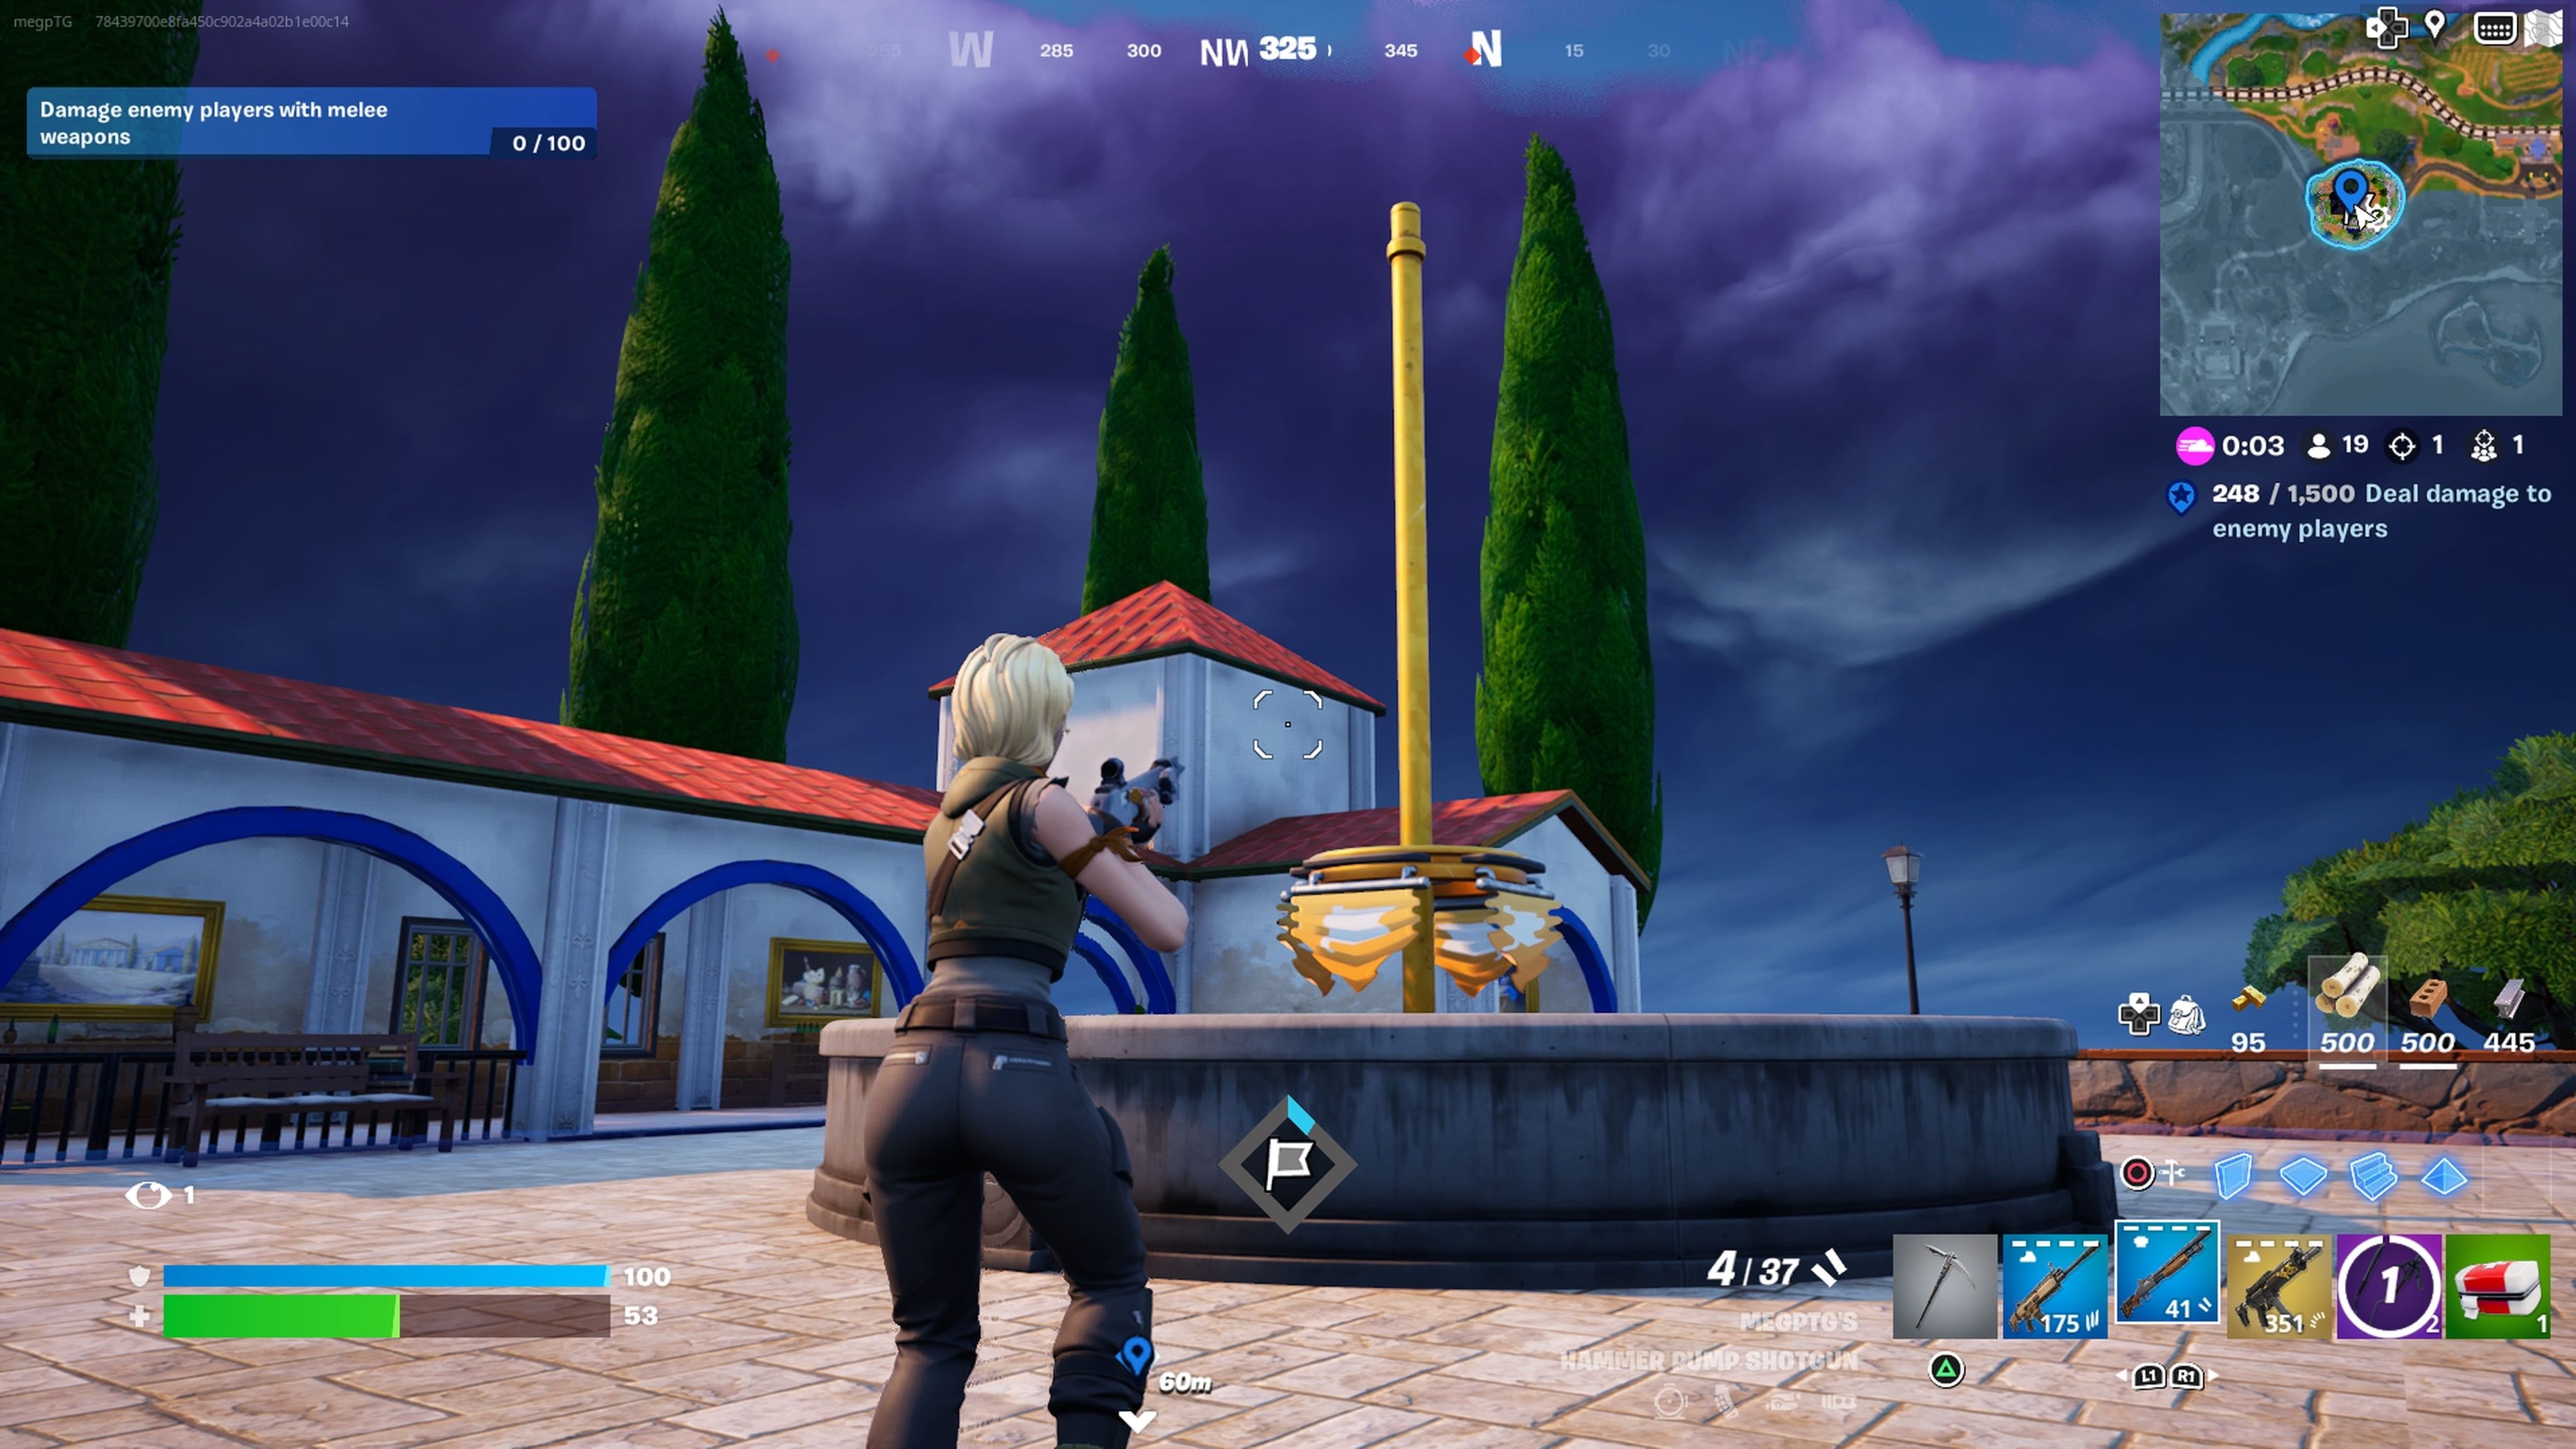 A player near the floating island capture point in Fortnite.